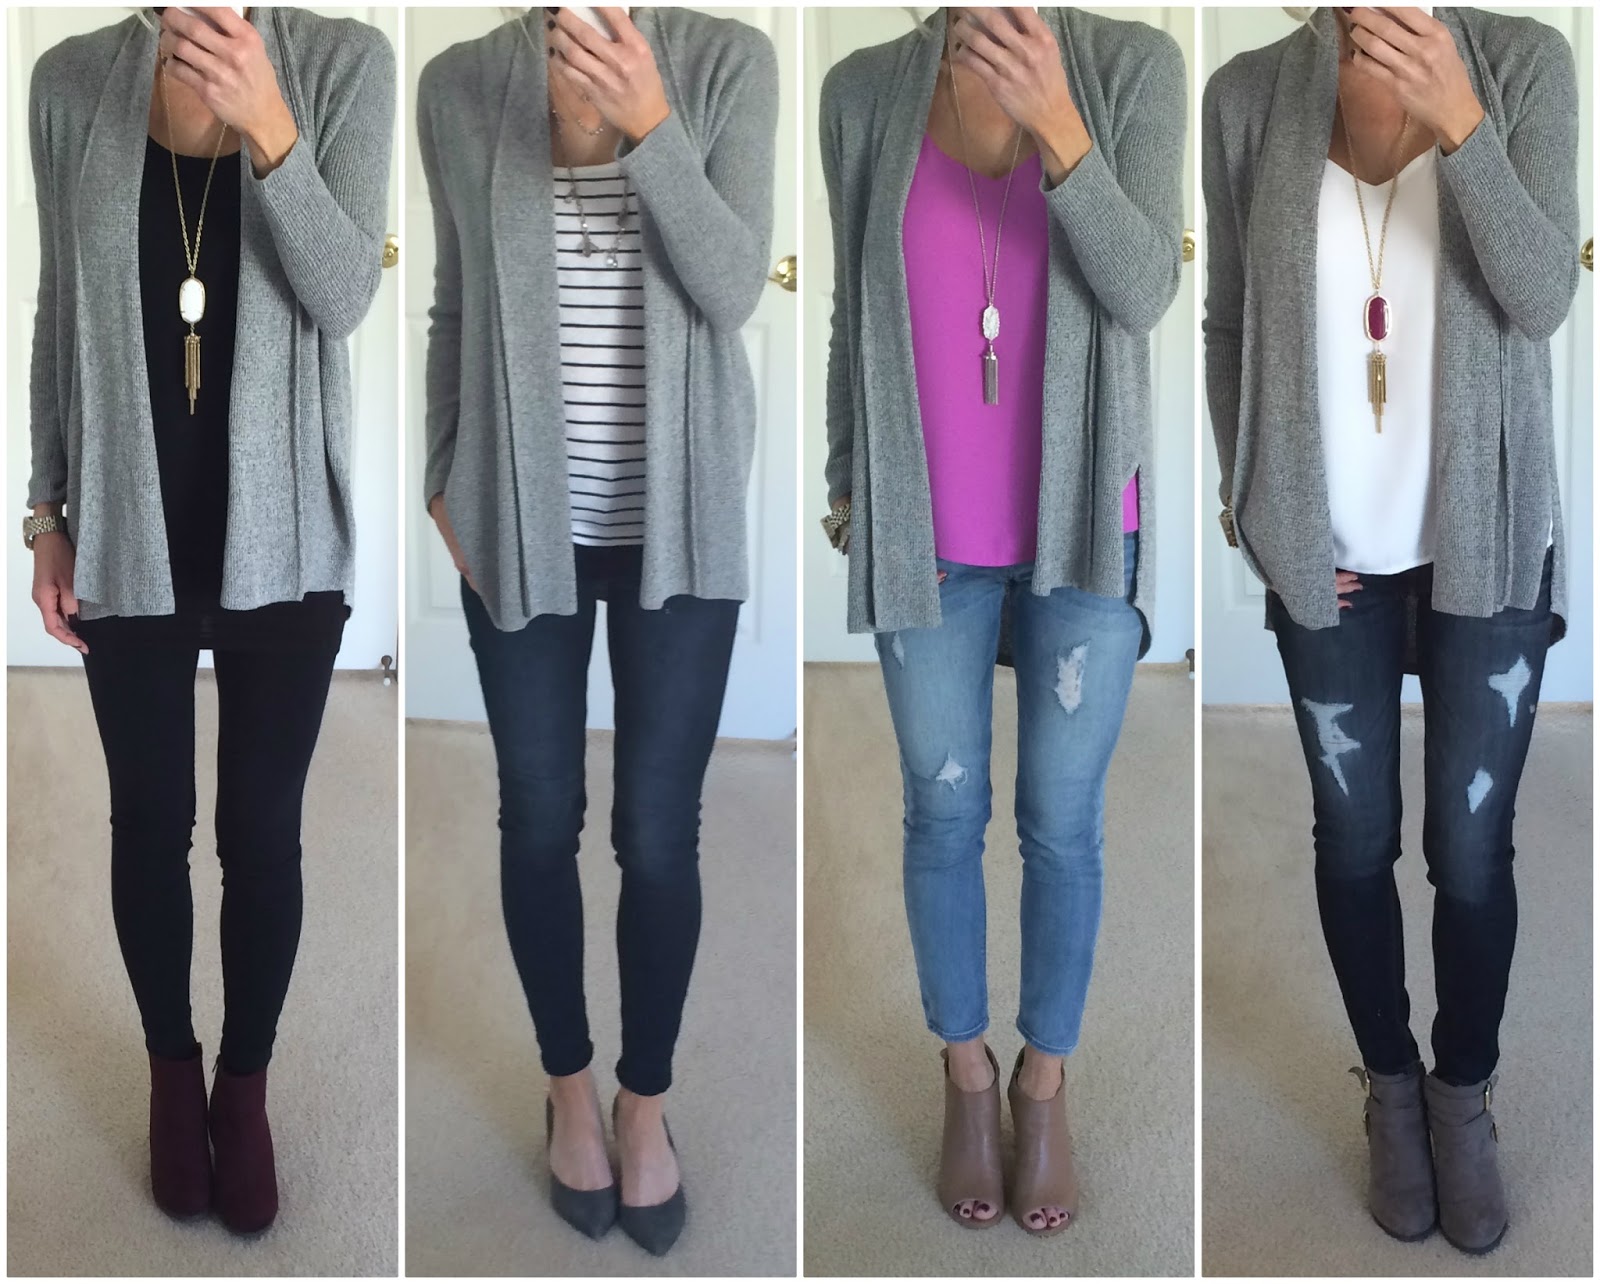 Cozy Cardigan Roundup | On the Daily EXPRESS